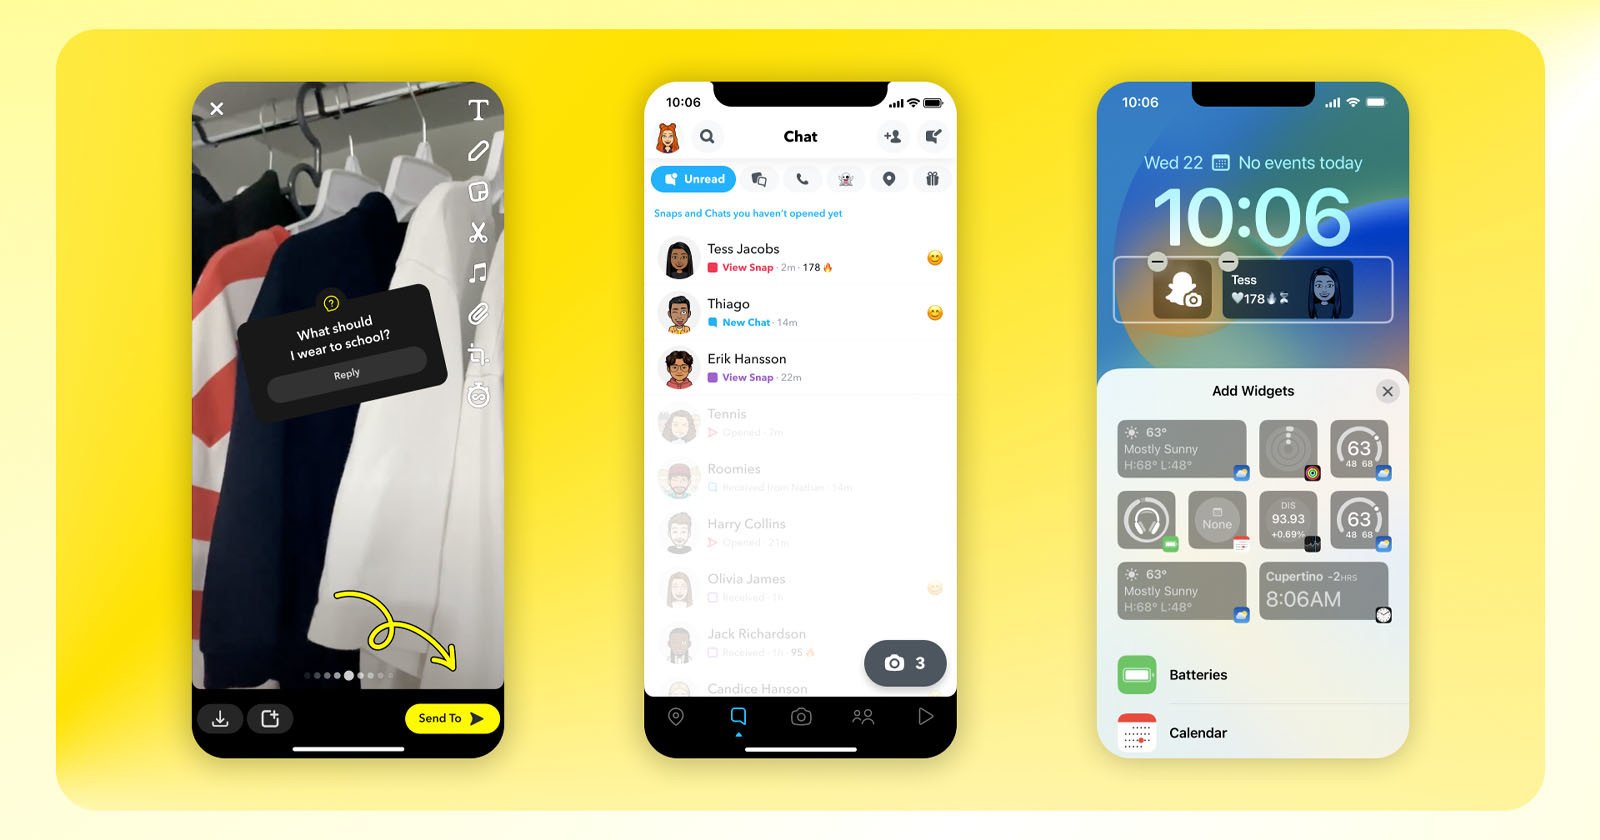  snapchat web now available all users worldwide 